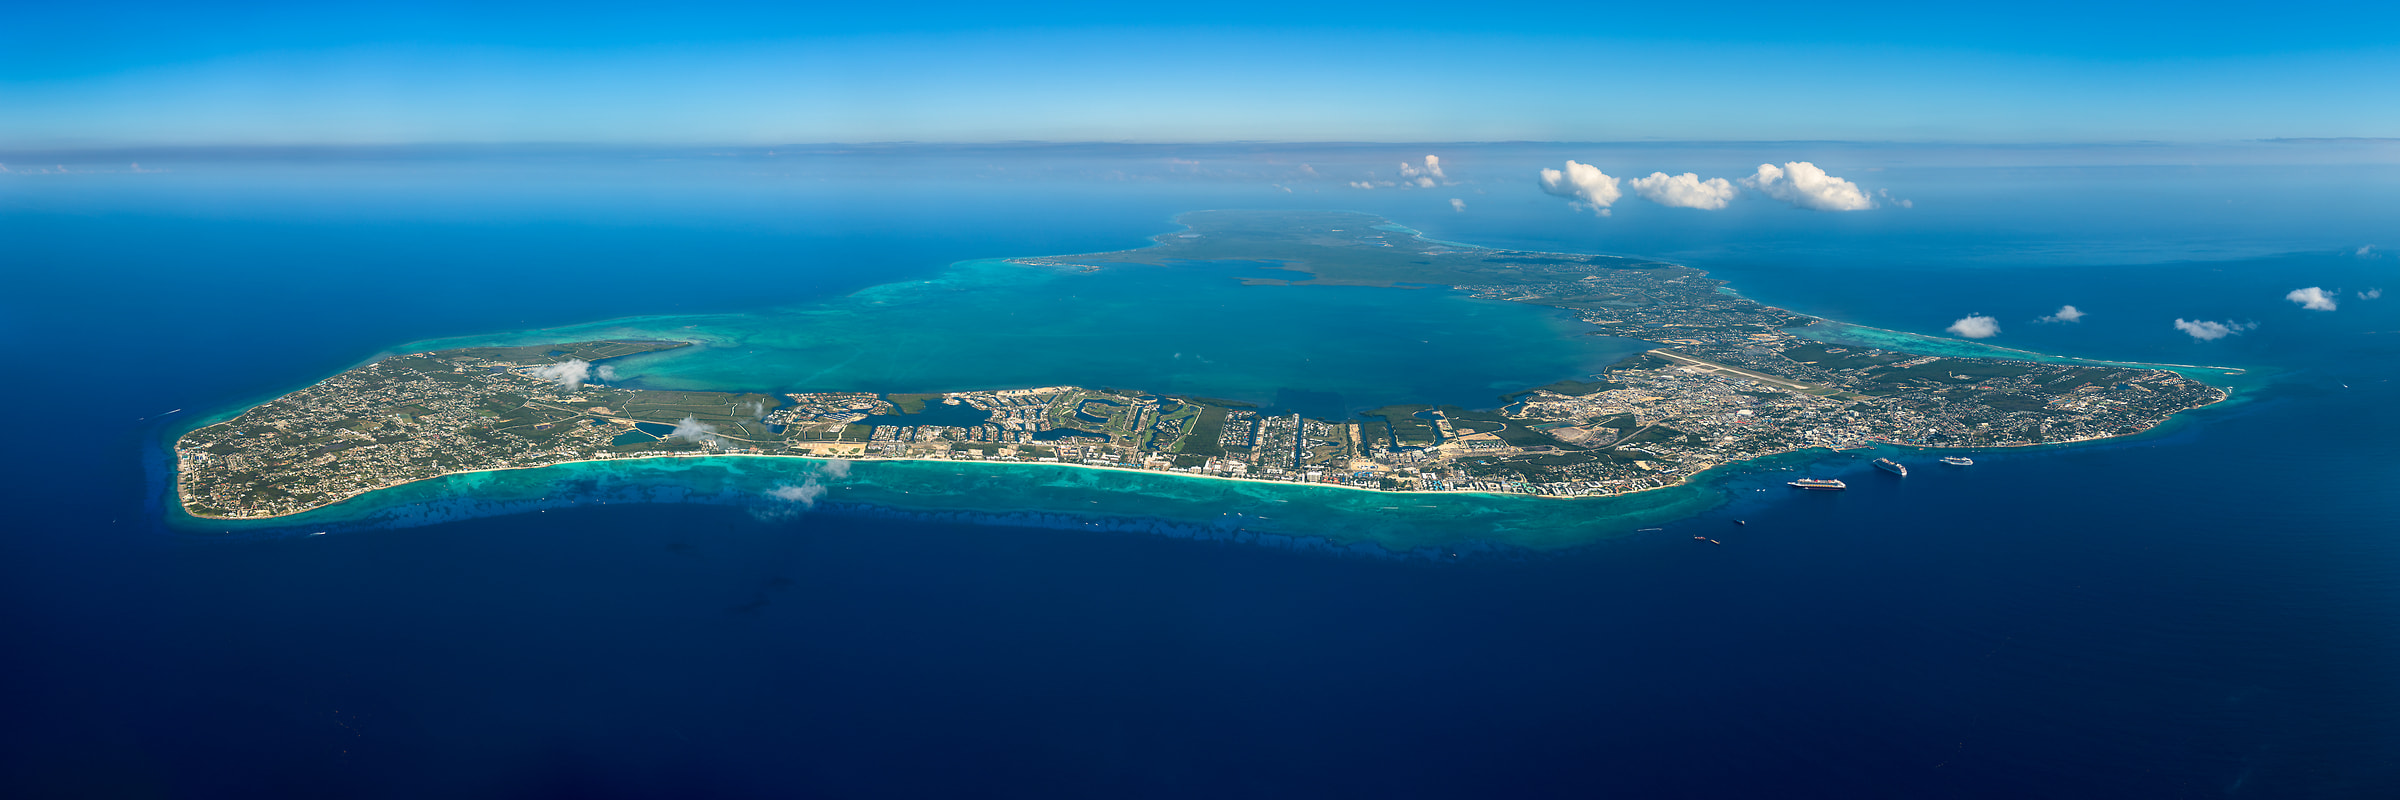 428 megapixels! A very high resolution aerial photo of Seven Mile Beach on Grand Cayman island; VAST photo created by Aaron Priest in the Cayman Islands.